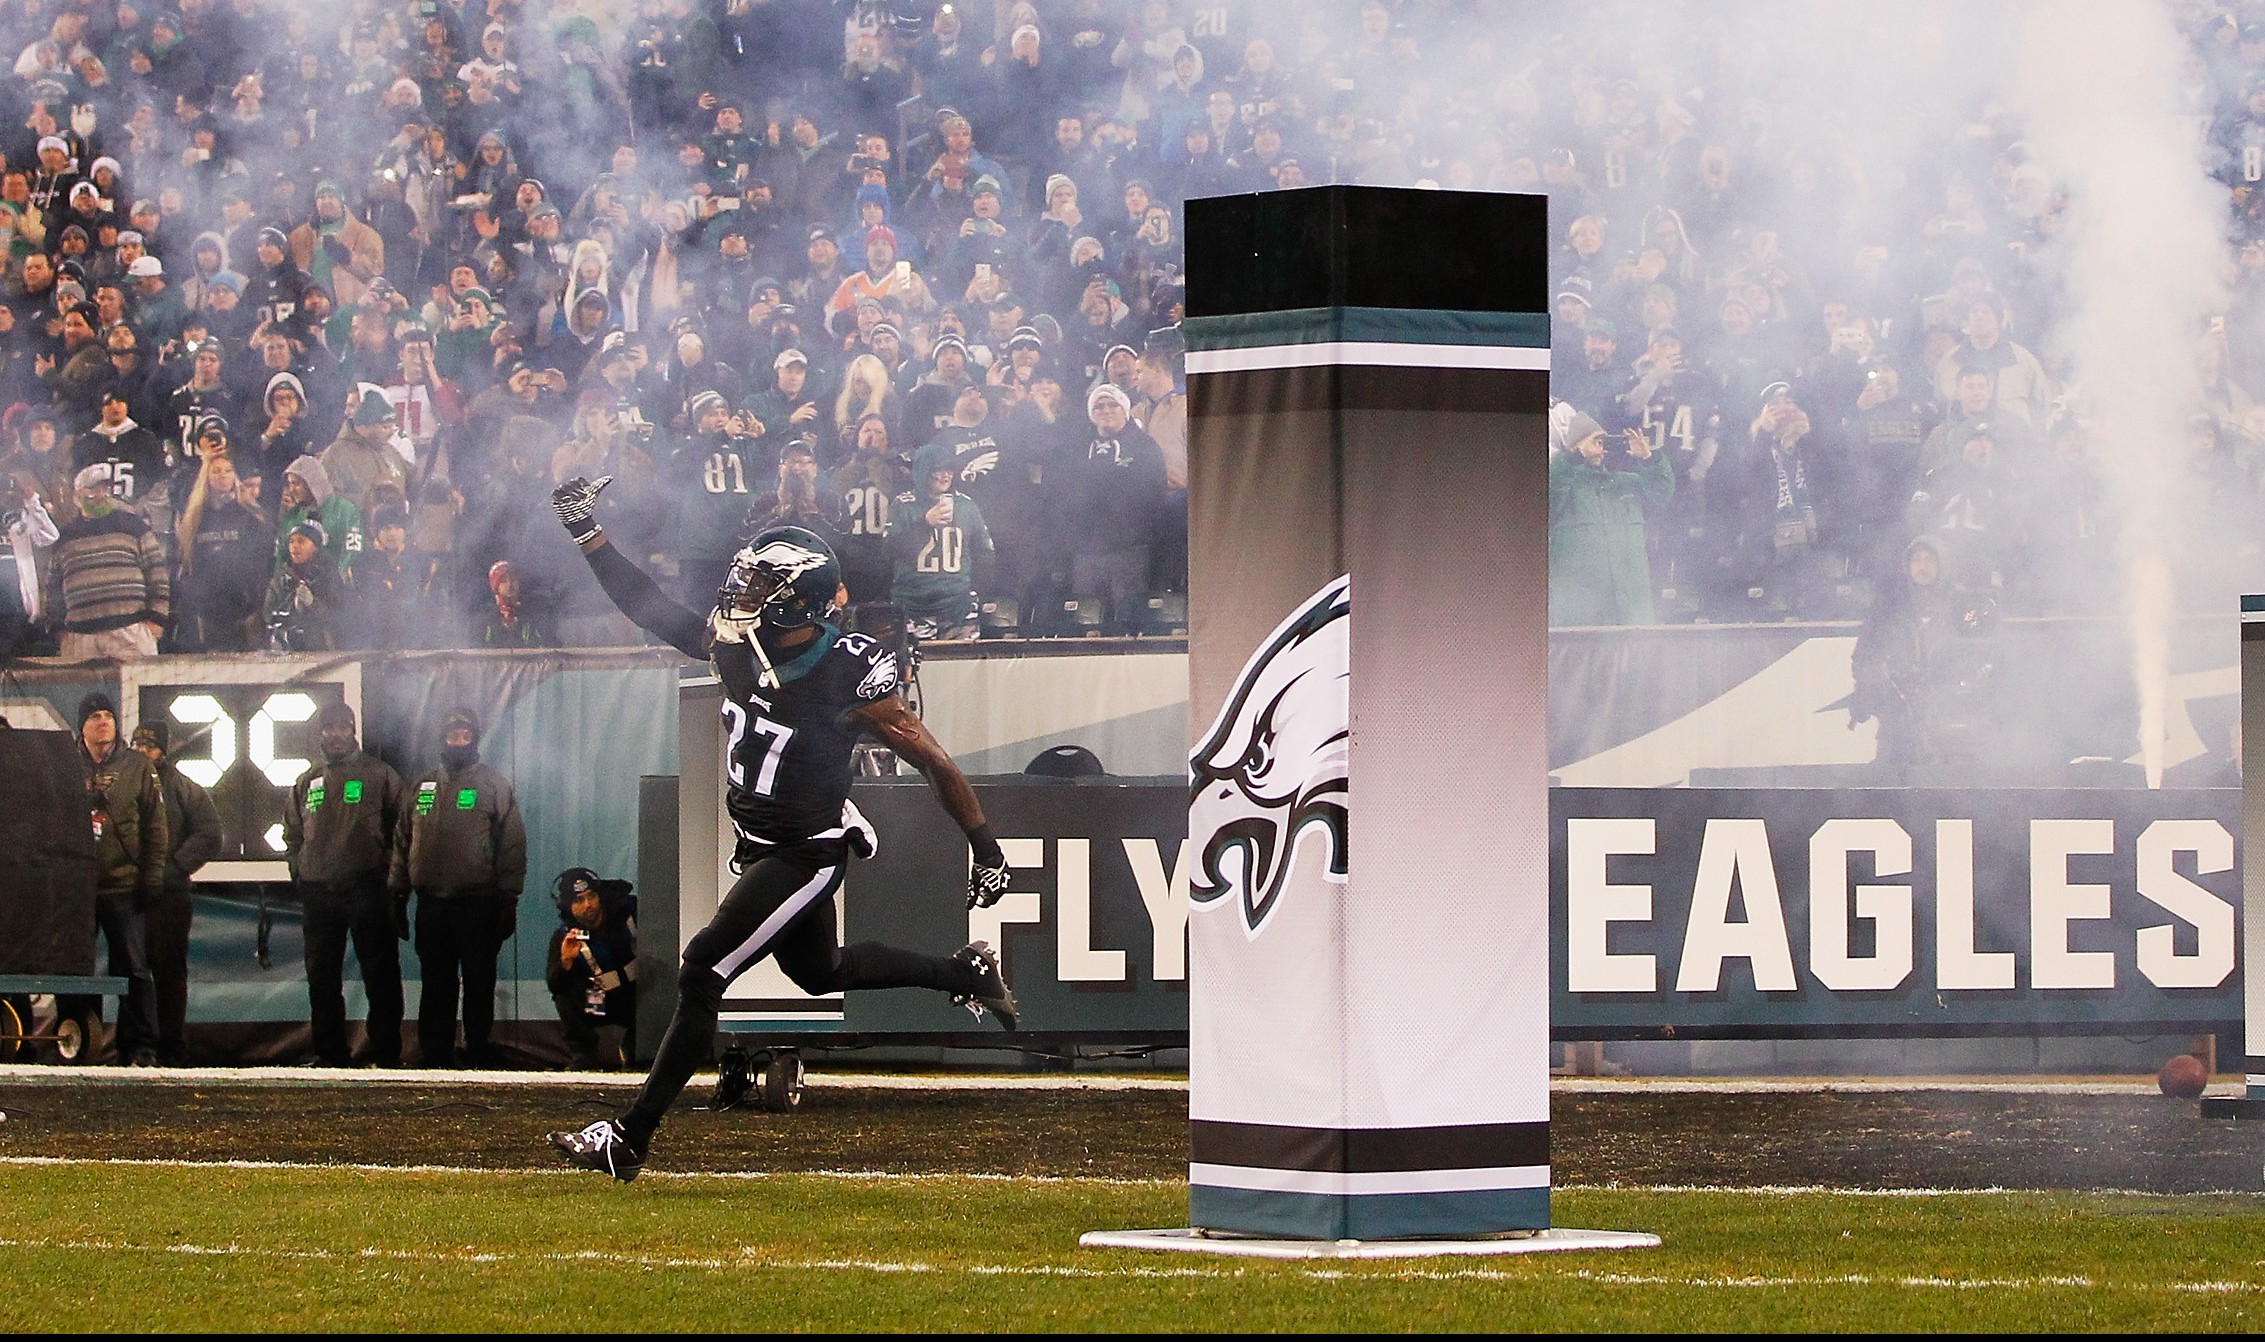 PHILADELPHIA, PA - DECEMBER 20: Malcolm Jenkins #27 of the Philadelphia Eagles takes the field before the game against the Arizona Cardinals at Lincoln Financial Field on December 20, 2015 in Philadelphia, Pennsylvania. (Photo by Rich Schultz/Getty Images)